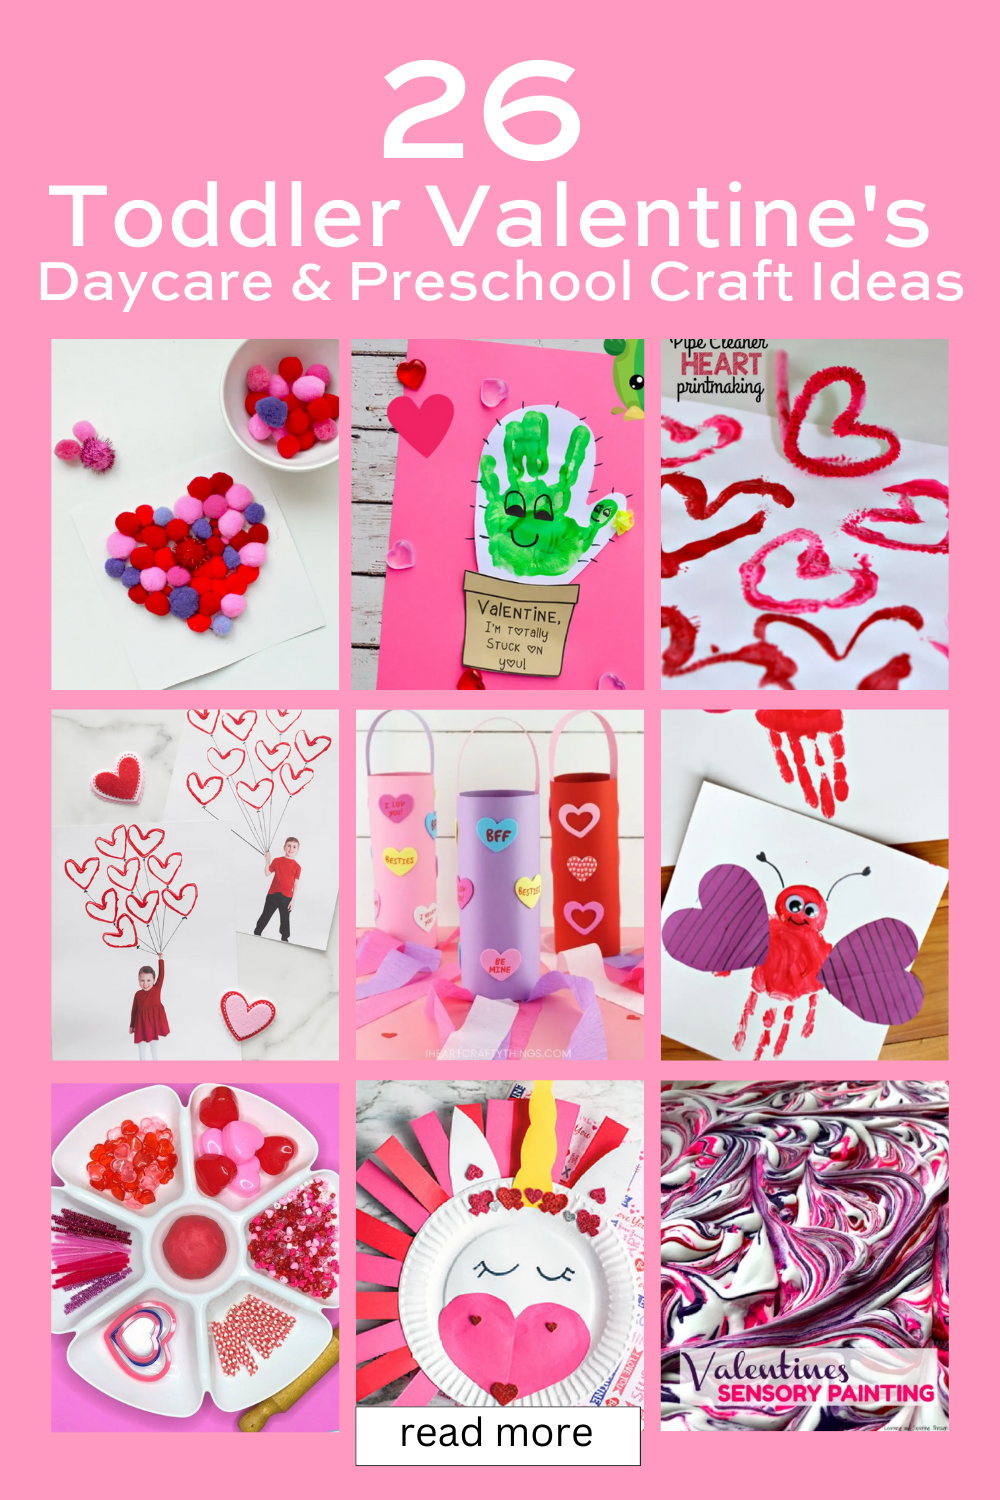 These 20 Adorable Valentine's Day Children's Crafts Make Great Gifts